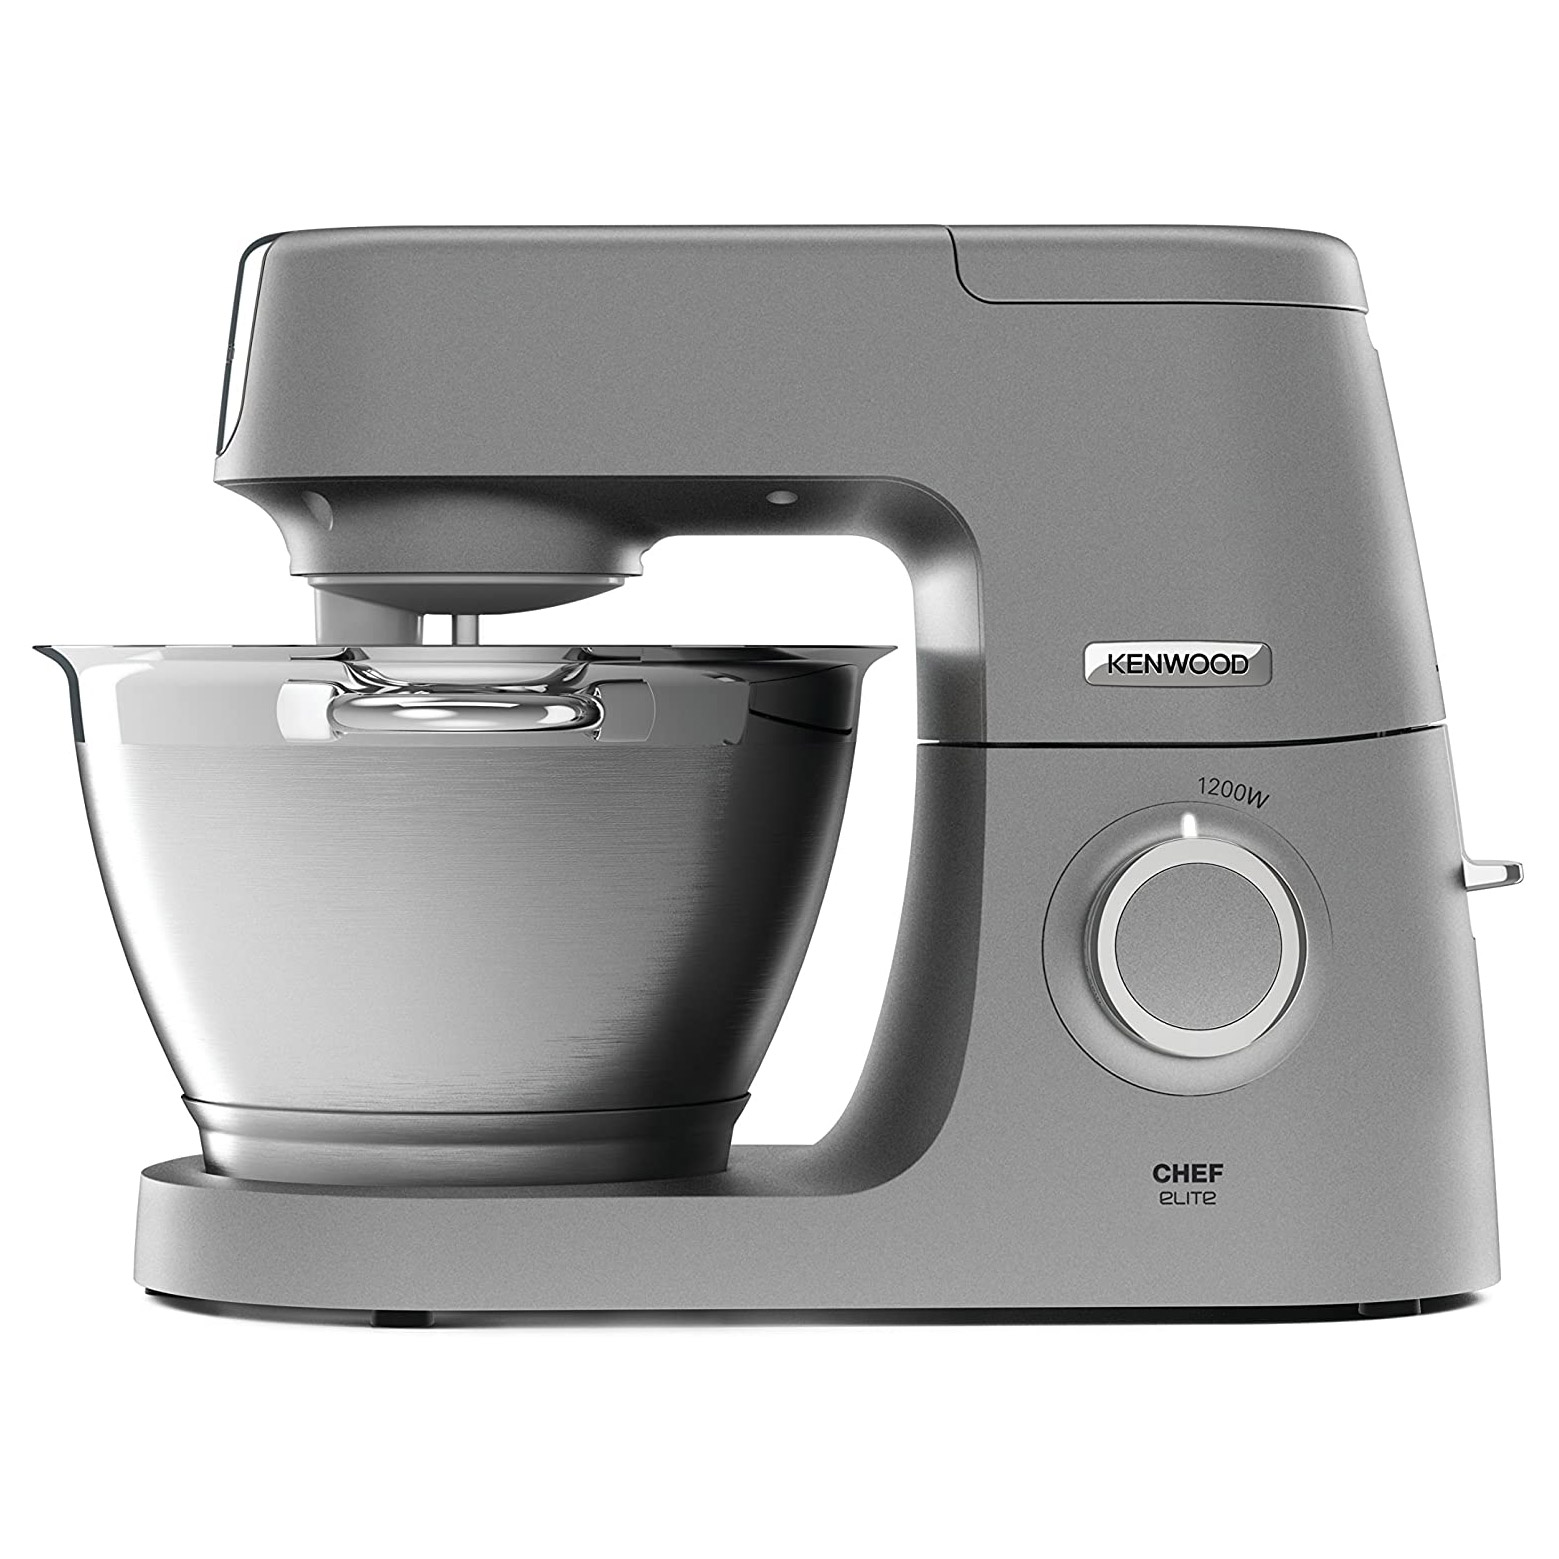 Image of Kenwood KVC5100S Chef Elite Stand Mixer Silver 1200W Motor